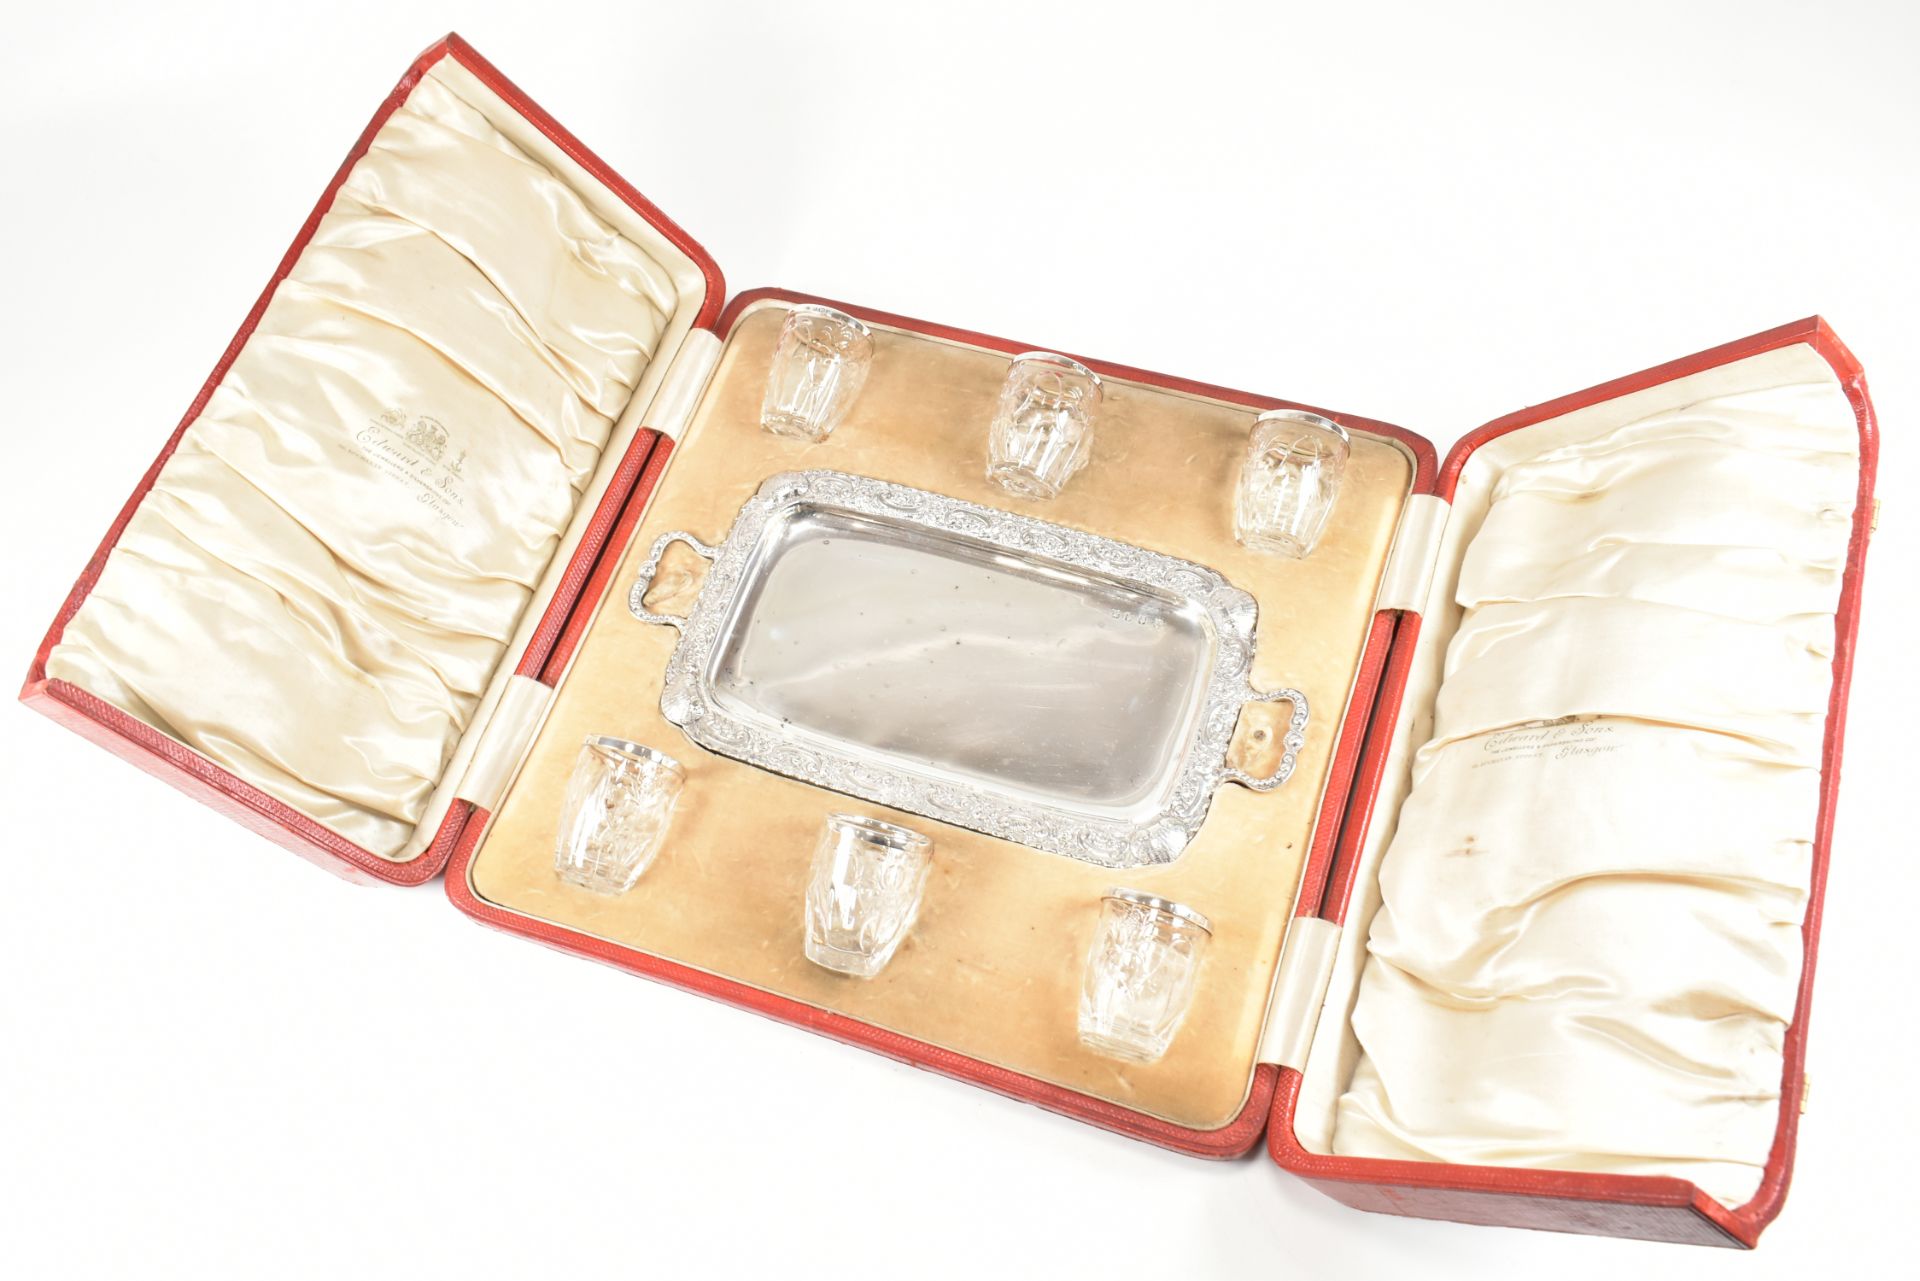 EDWARDIAN CASED SILVER MOUNTED TOT GLASS & TRAY SET - Image 8 of 15